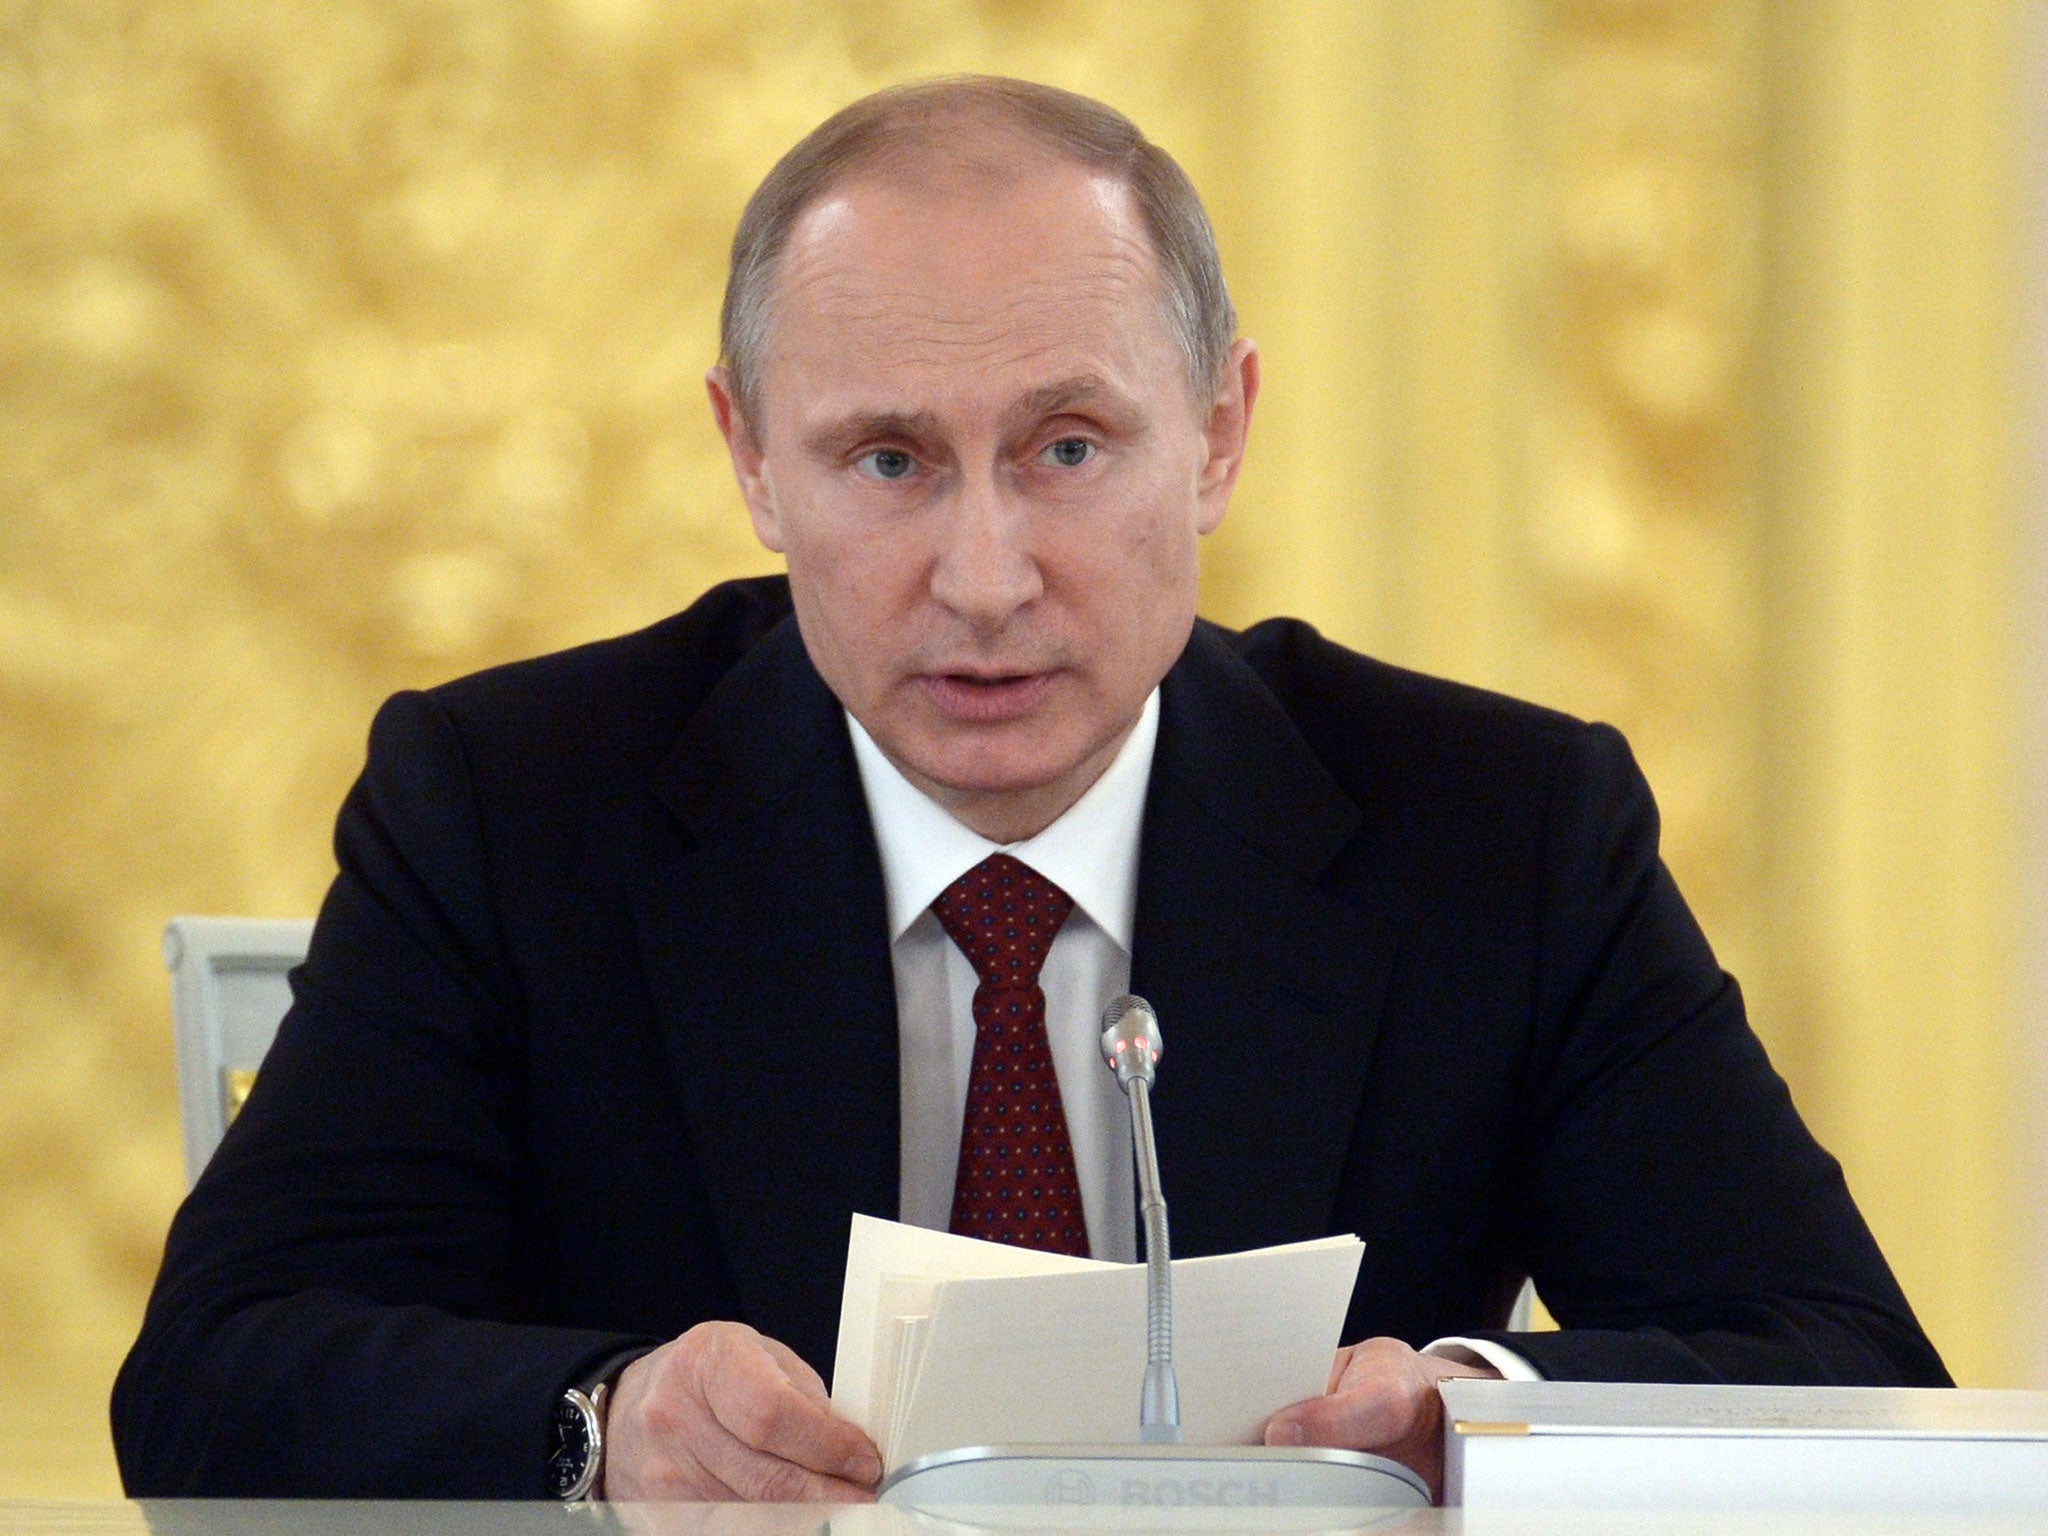 Russian President Vladimir Putin speaks at a government meeting at the Kremlin in Moscow on 24 March, 2014